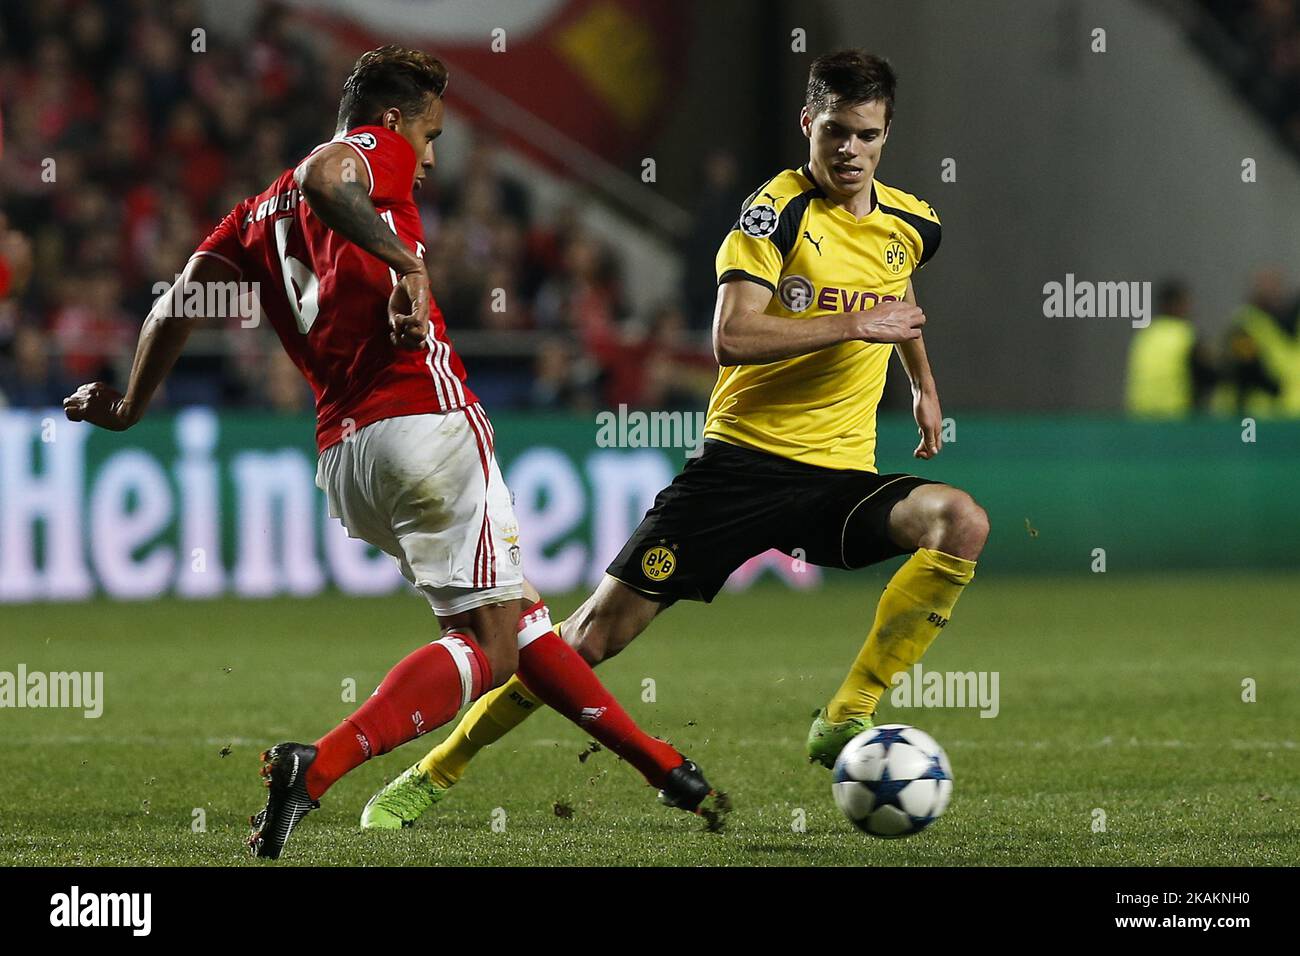 Benfica's midfielder Filipe Augusto (L) vies for the ball with Dortmund's midfielder Julian Weigl (R) during Champions League 2016/17 match between SL Benfica vs BVB Borussia Dortmund, in Lisbon, on February 14, 2017. (Photo by Carlos Palma/NurPhoto) *** Please Use Credit from Credit Field *** Stock Photo